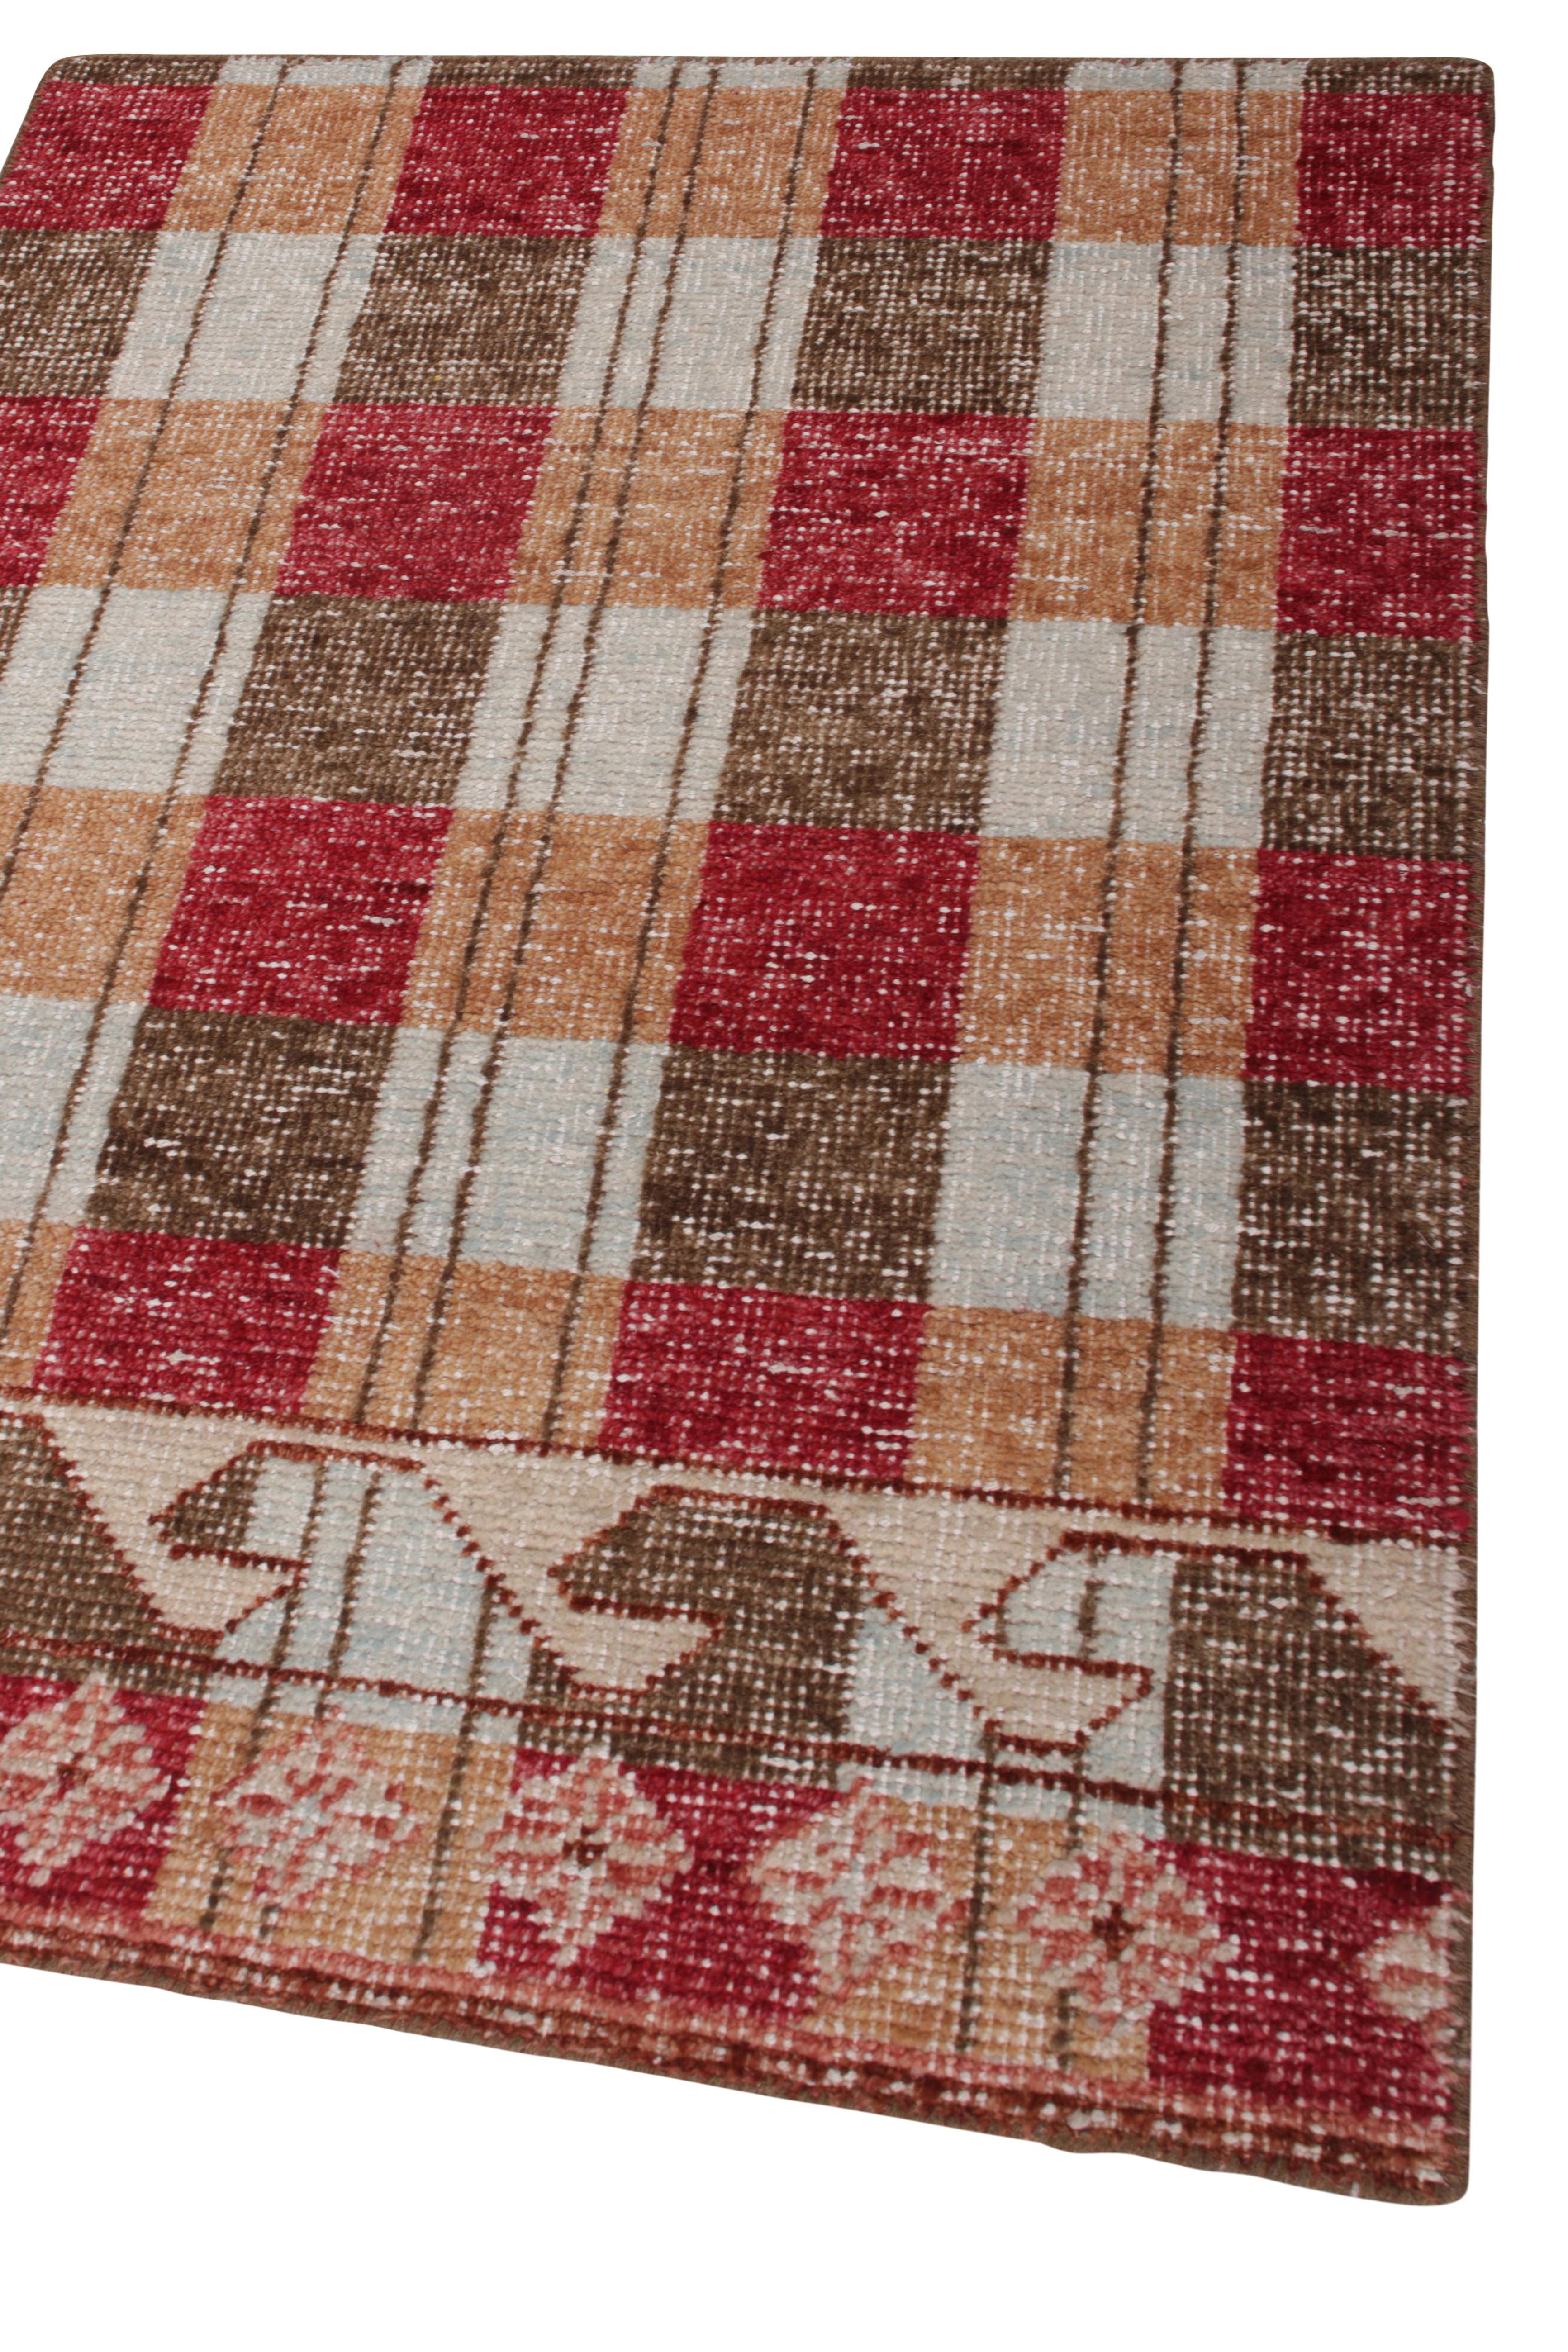 This 2x3 rug hails from the gift-size selections of Rug & Kilim’s Homage Collection, remarking a bold take on distressed style. This design evokes Scandinavian rug sensibilities in a charming play of beige-brown, red and blue geometric patterns.